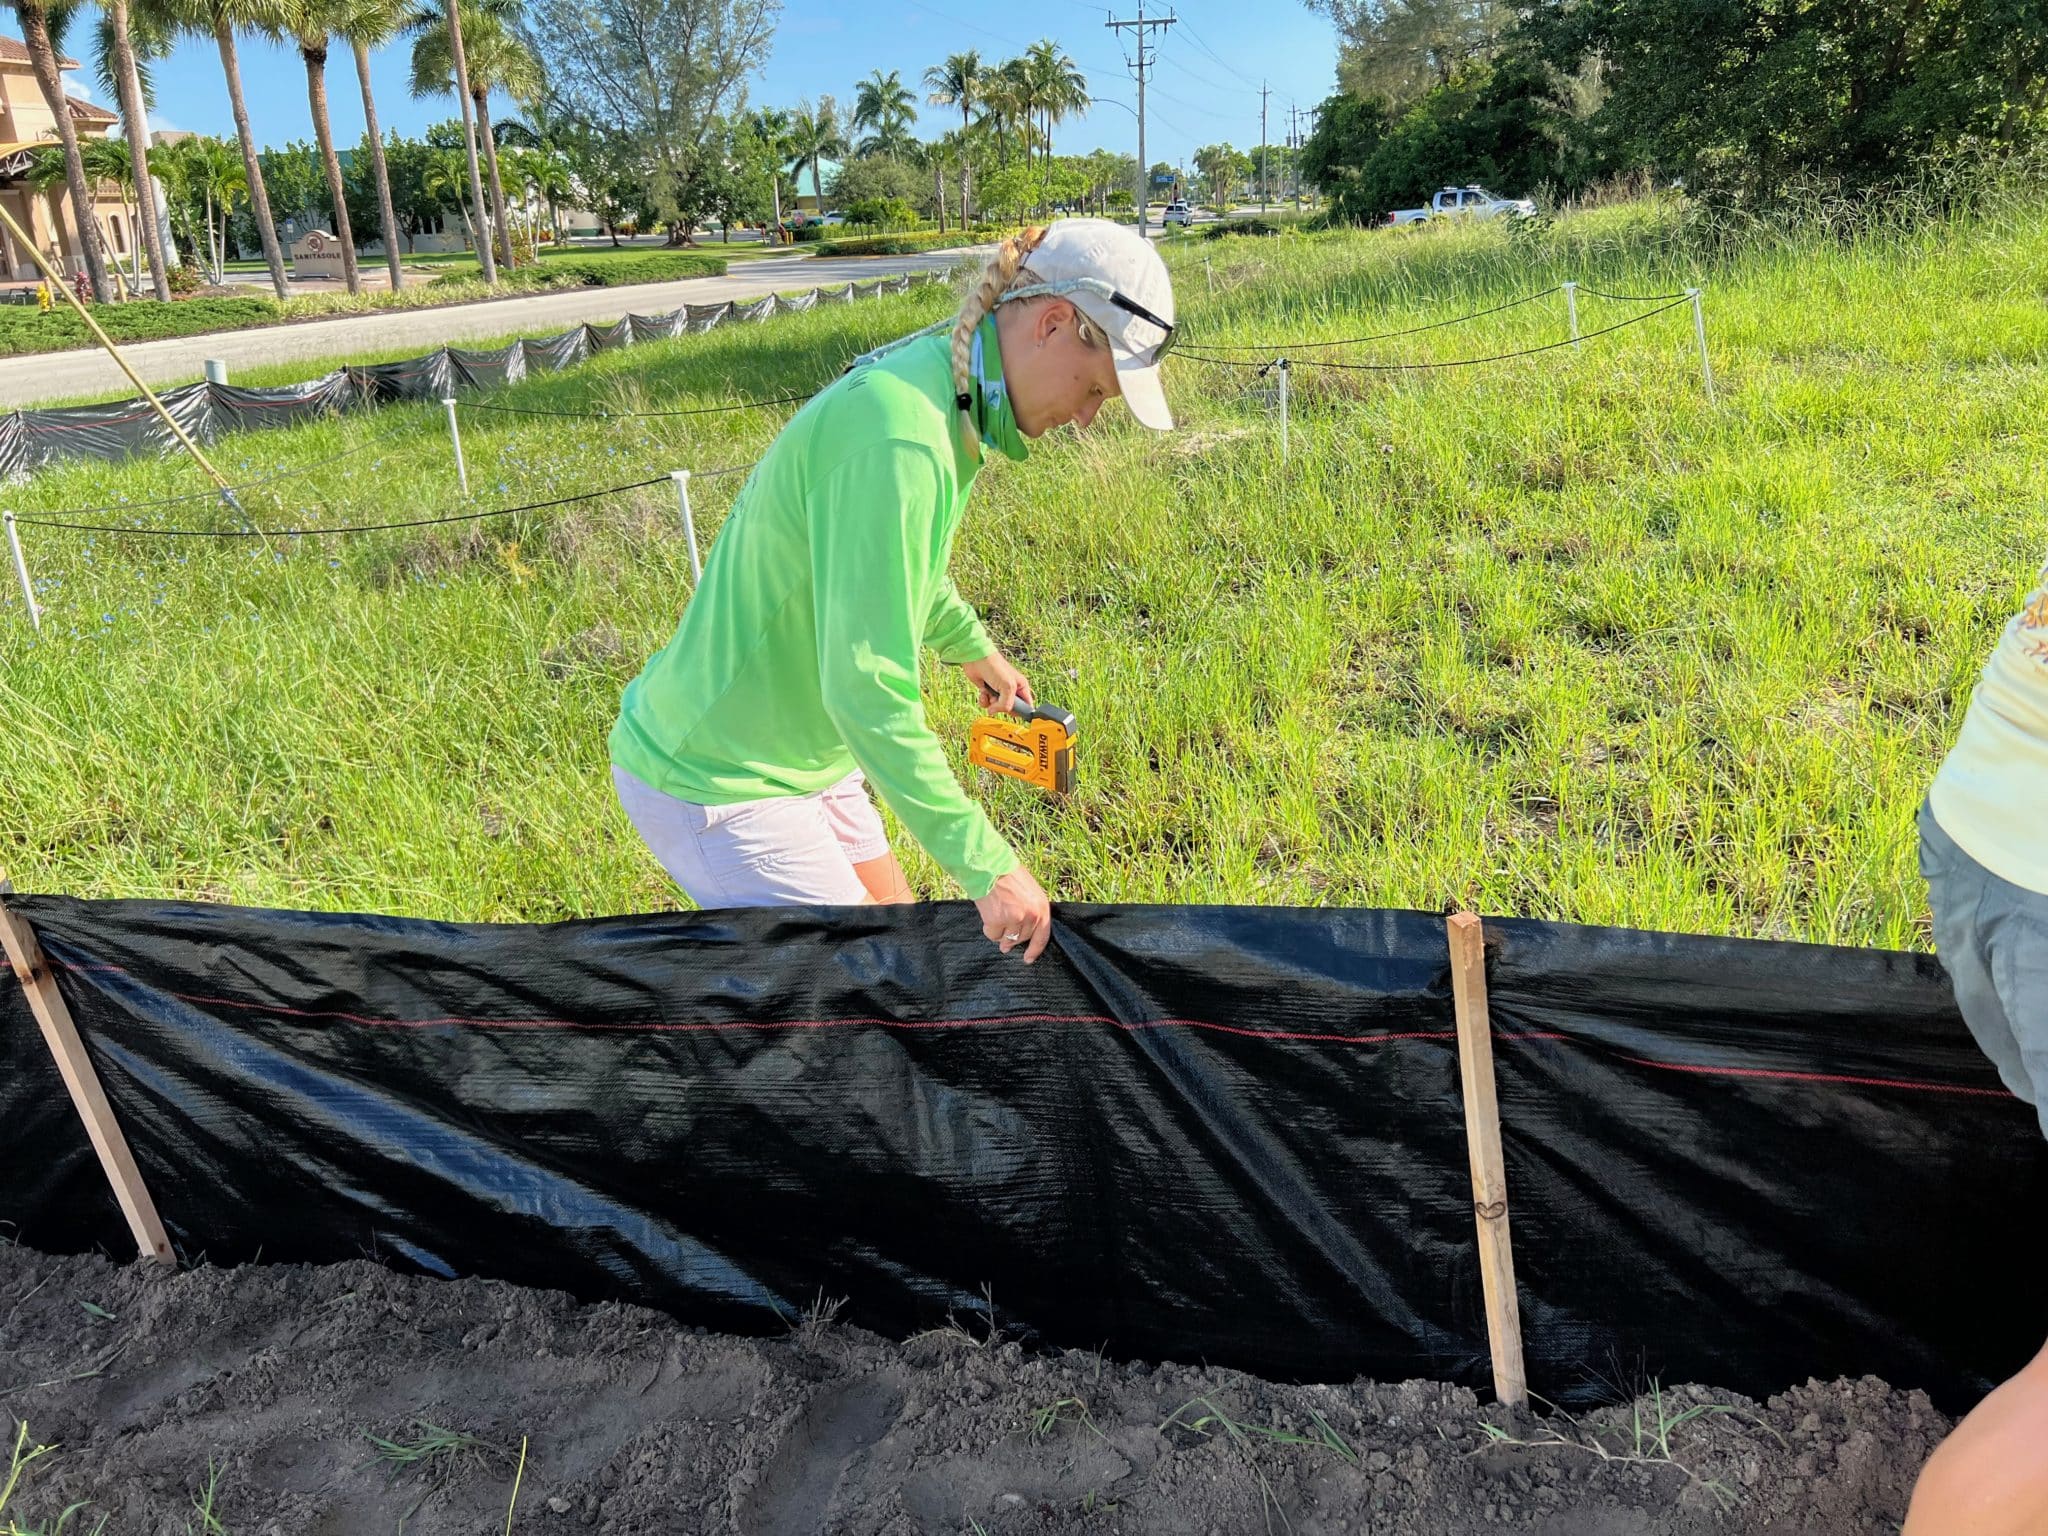 Brittany Piersma Field Biologist with the Audubon Western Everglades, surveys Gopher tortoises and Burrowing owls across the Marco Island area.